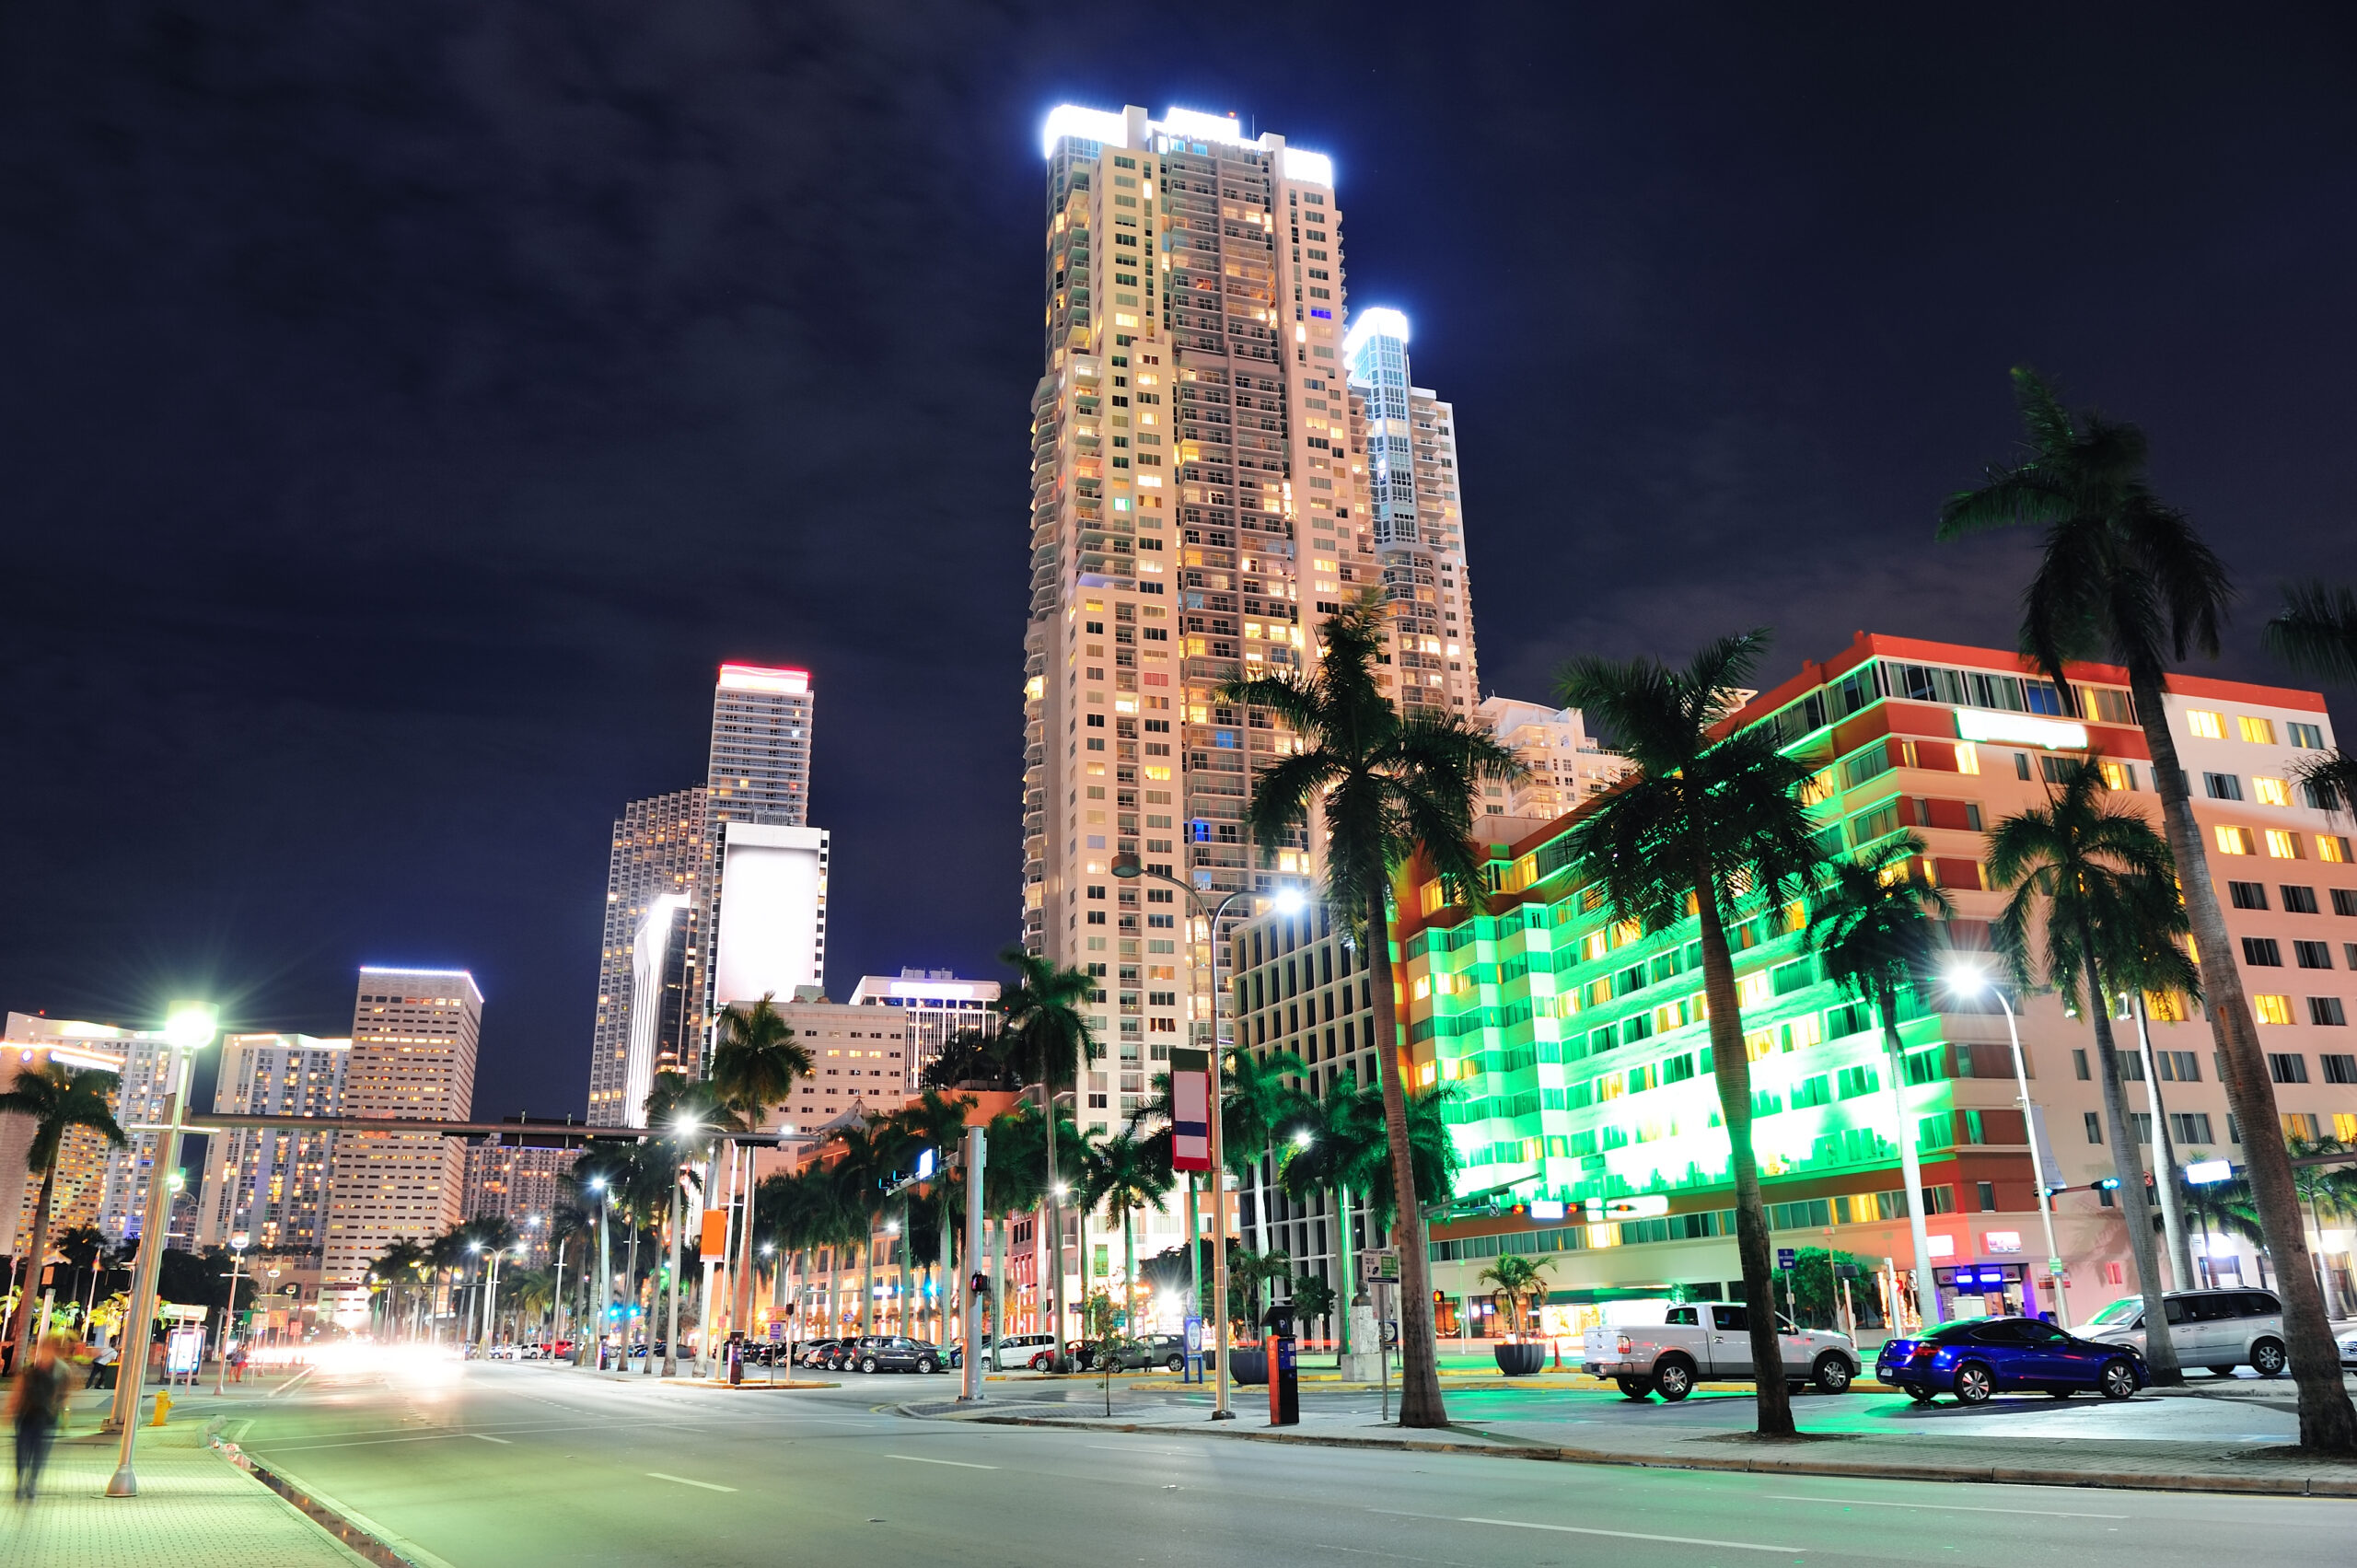 Miami downtown street view at night with hotels.